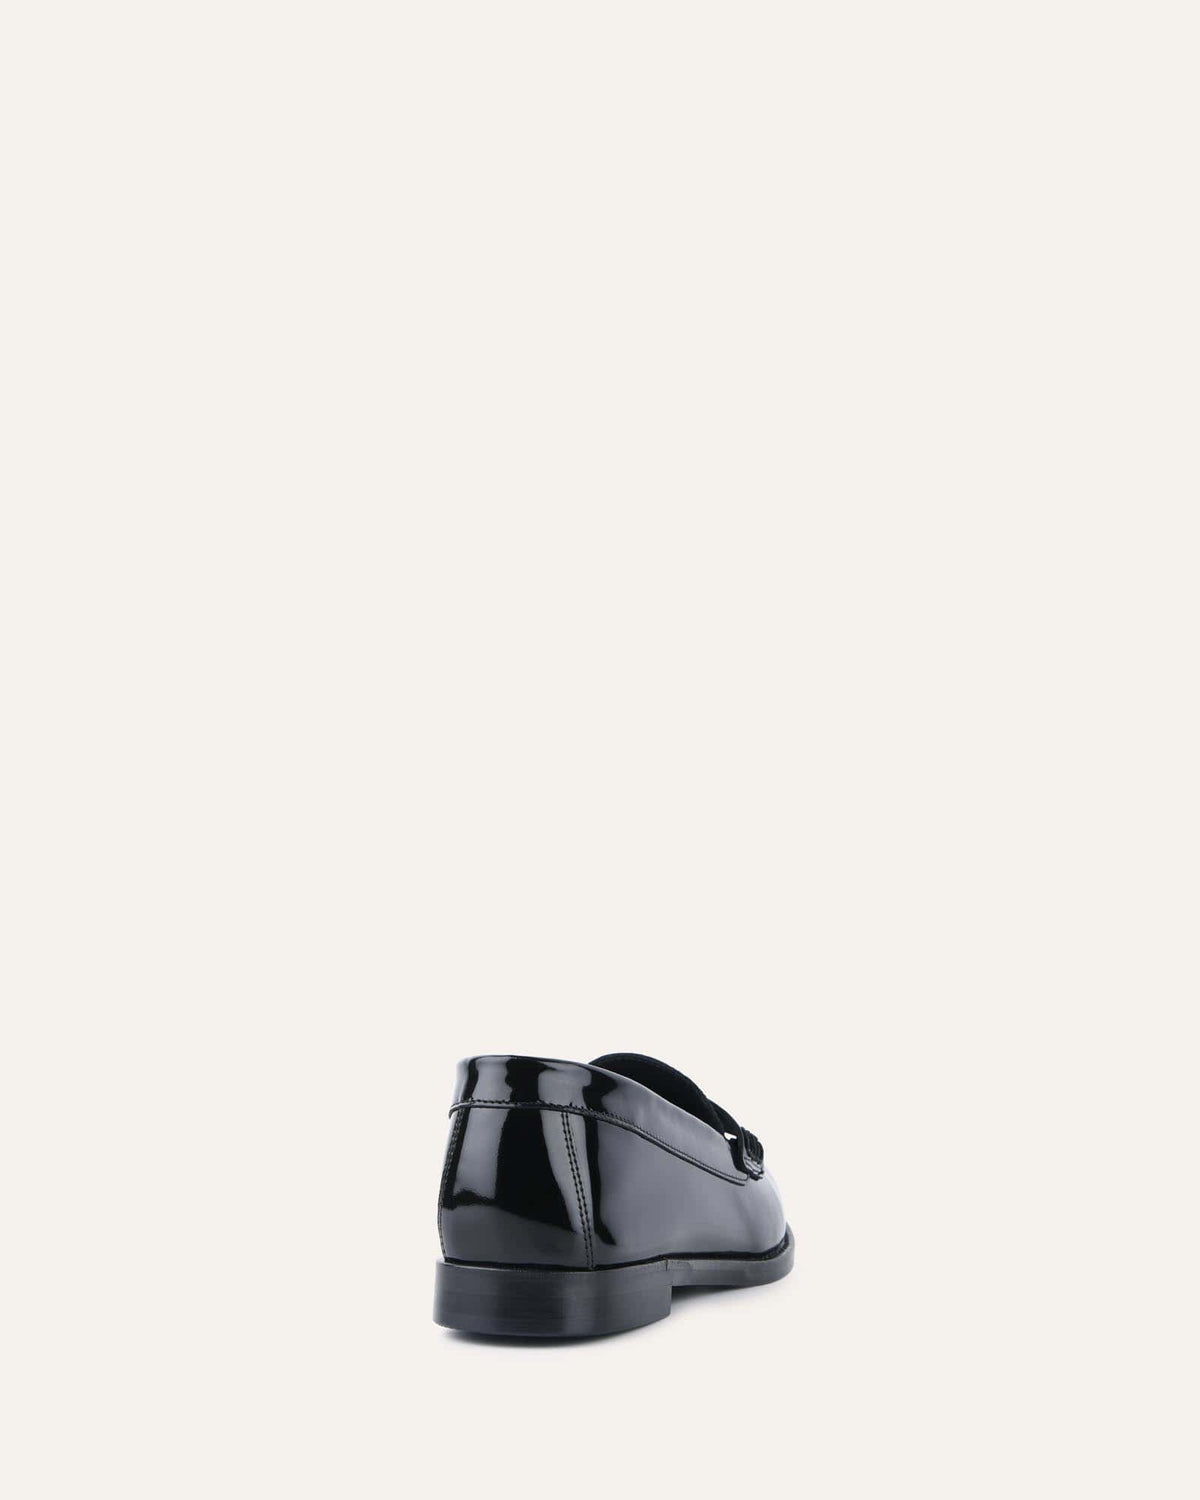 TAIT LOAFERS BLACK PATENT